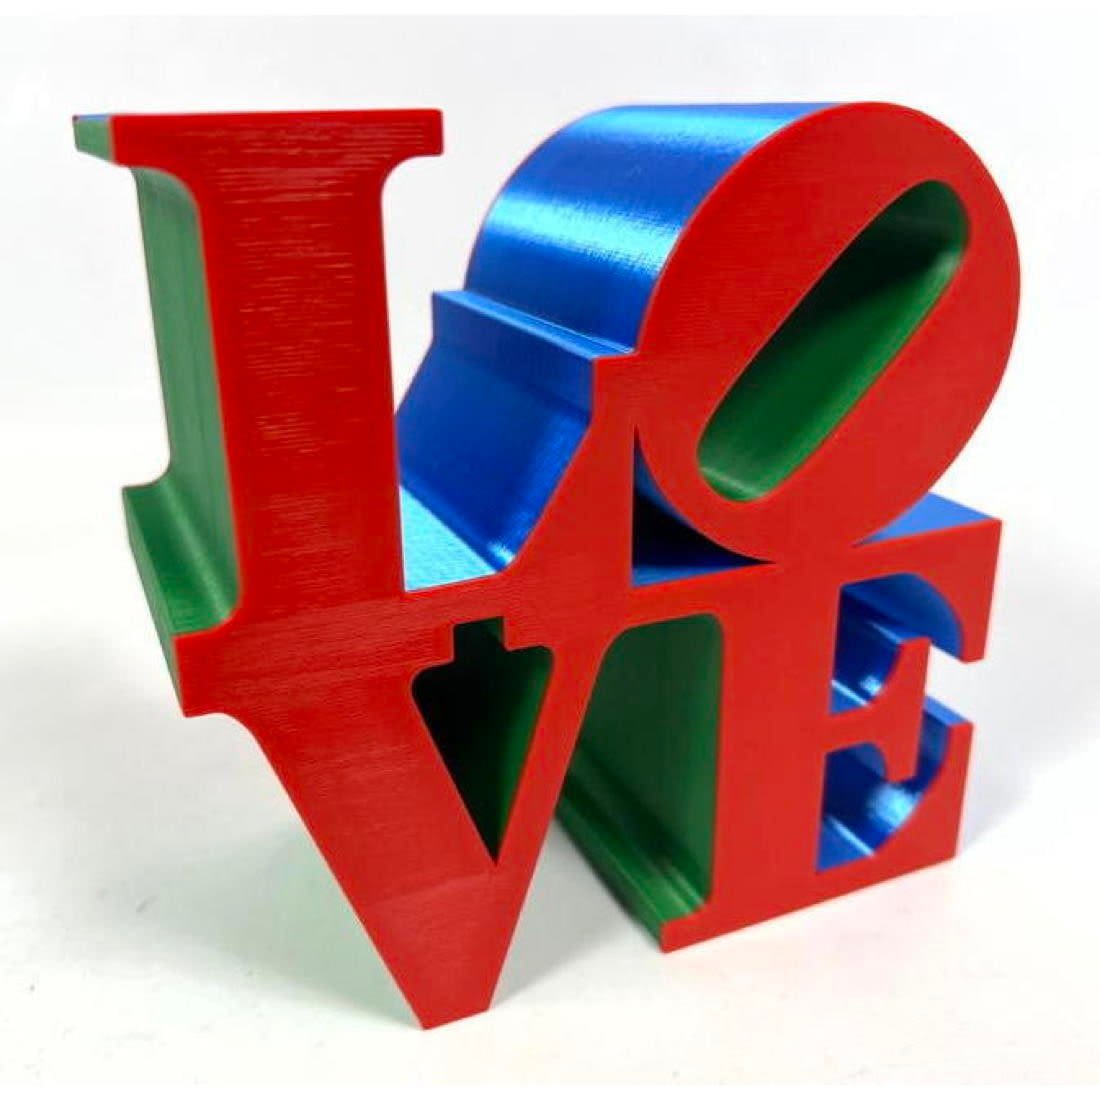 Robert Indiana inspired LOVE plastic 362a74